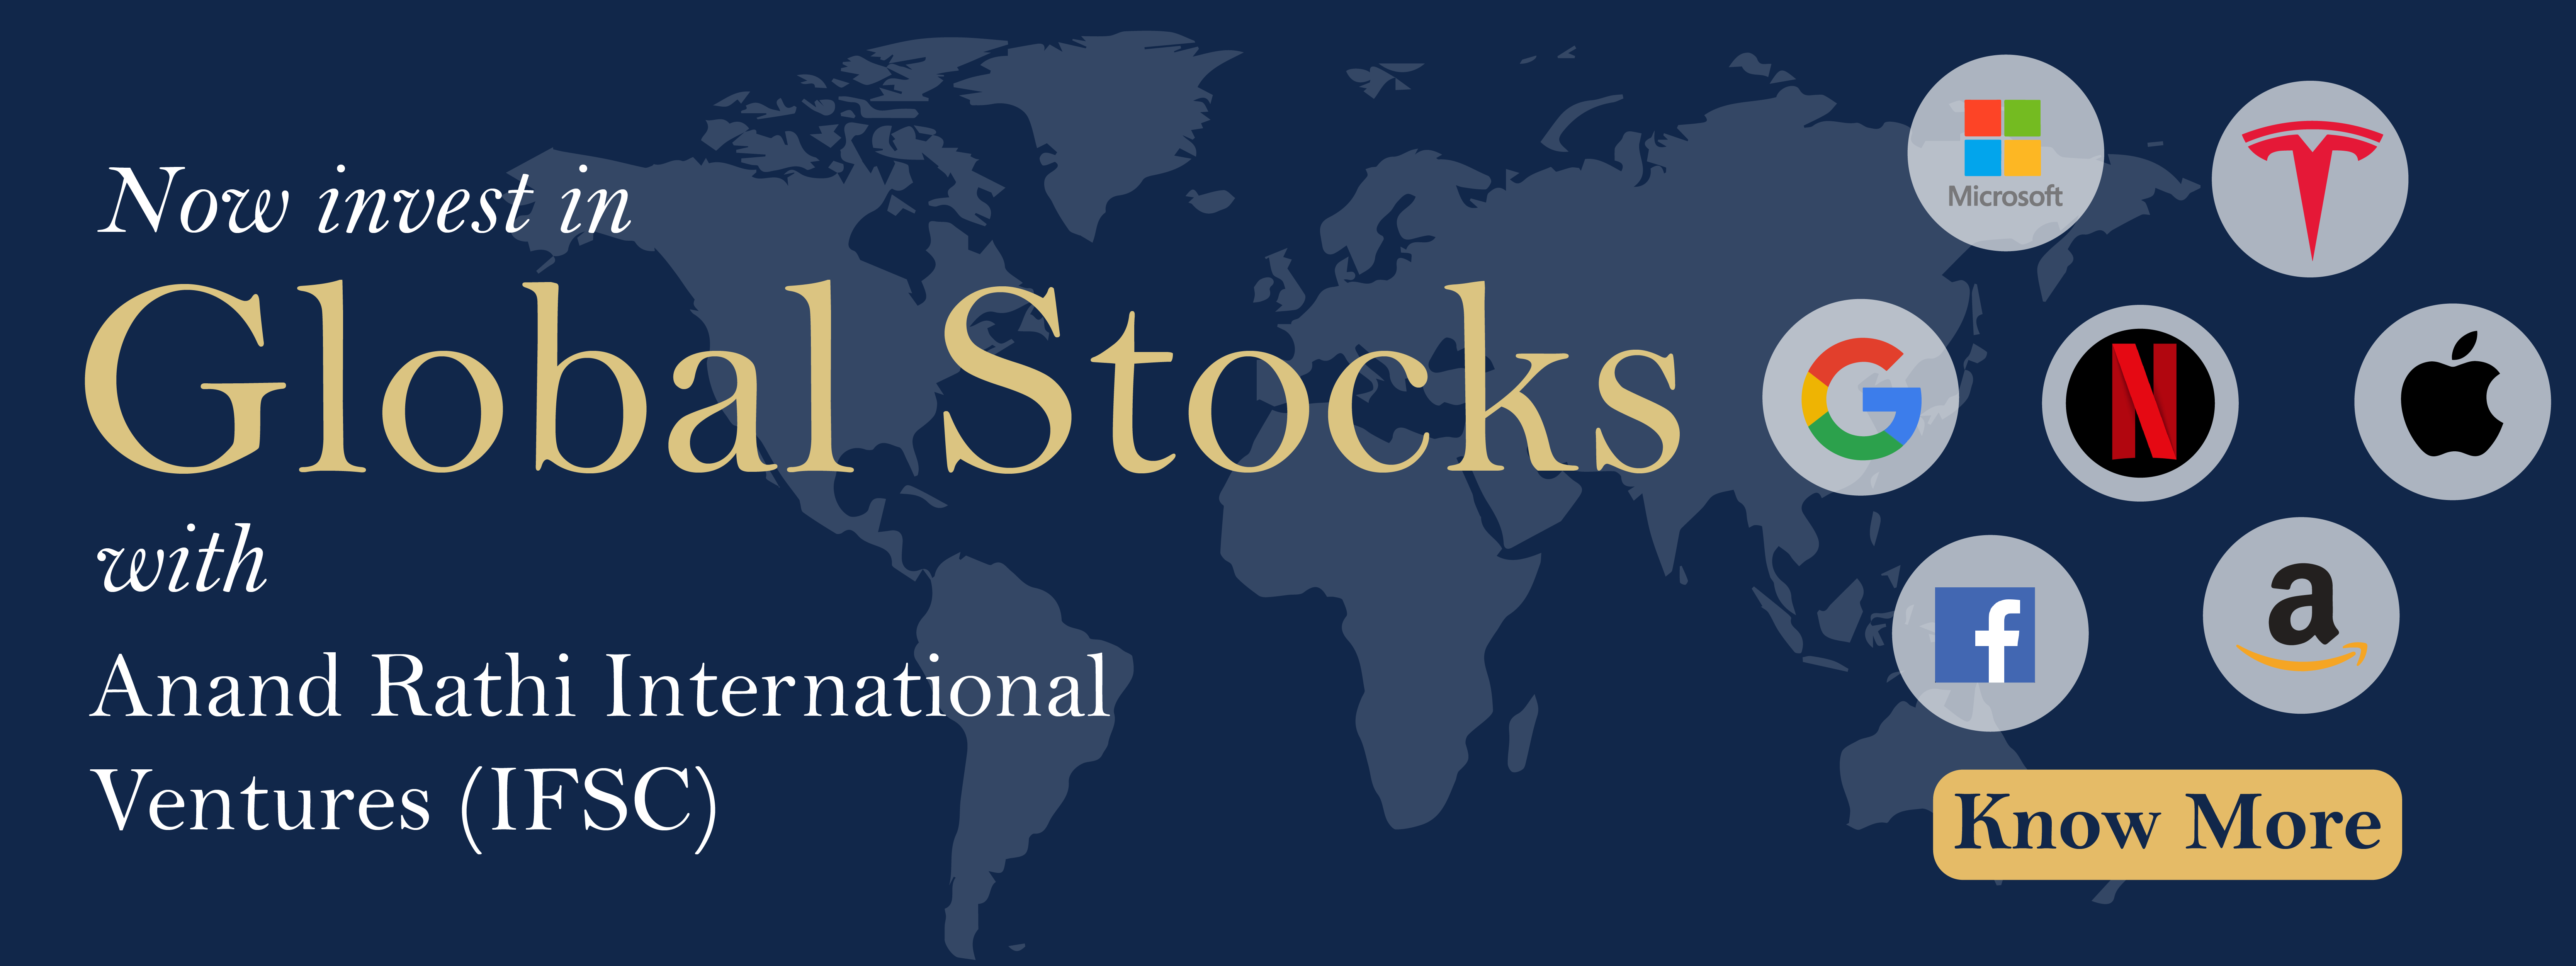 Invest In Global Stocks - Anand Rathi